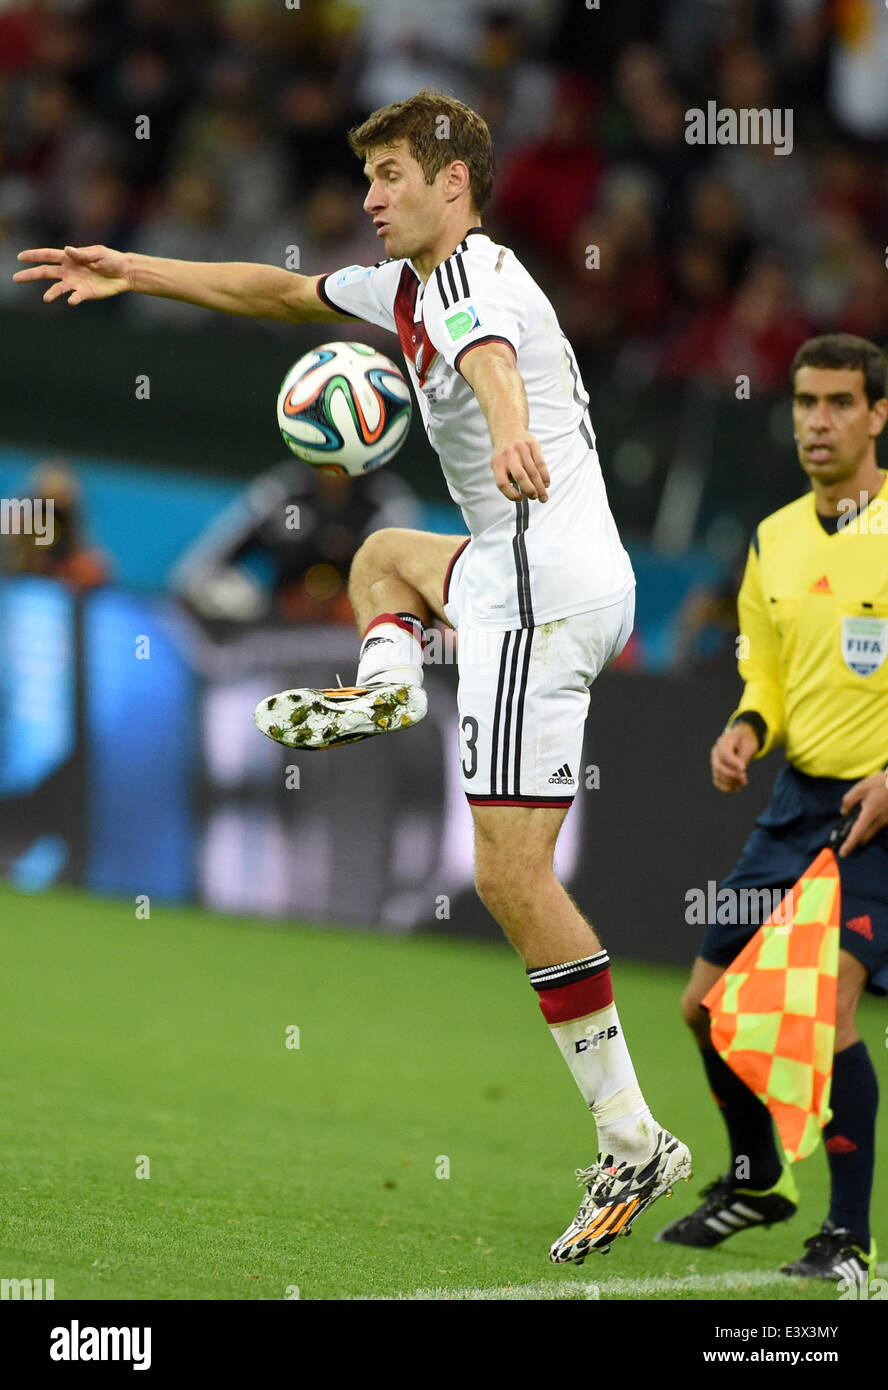 Porto Alegre, Brazil. 30th June, 2014. Thomas Mueller of Germany in action during the FIFA World Cup 2014 round of 16 soccer match between Germany and Algeria at the Estadio Beira-Rio in Porto Alegre, Brazil, 30 June 2014. Photo: Marcus Brandt/dpa/Alamy Live News Stock Photo